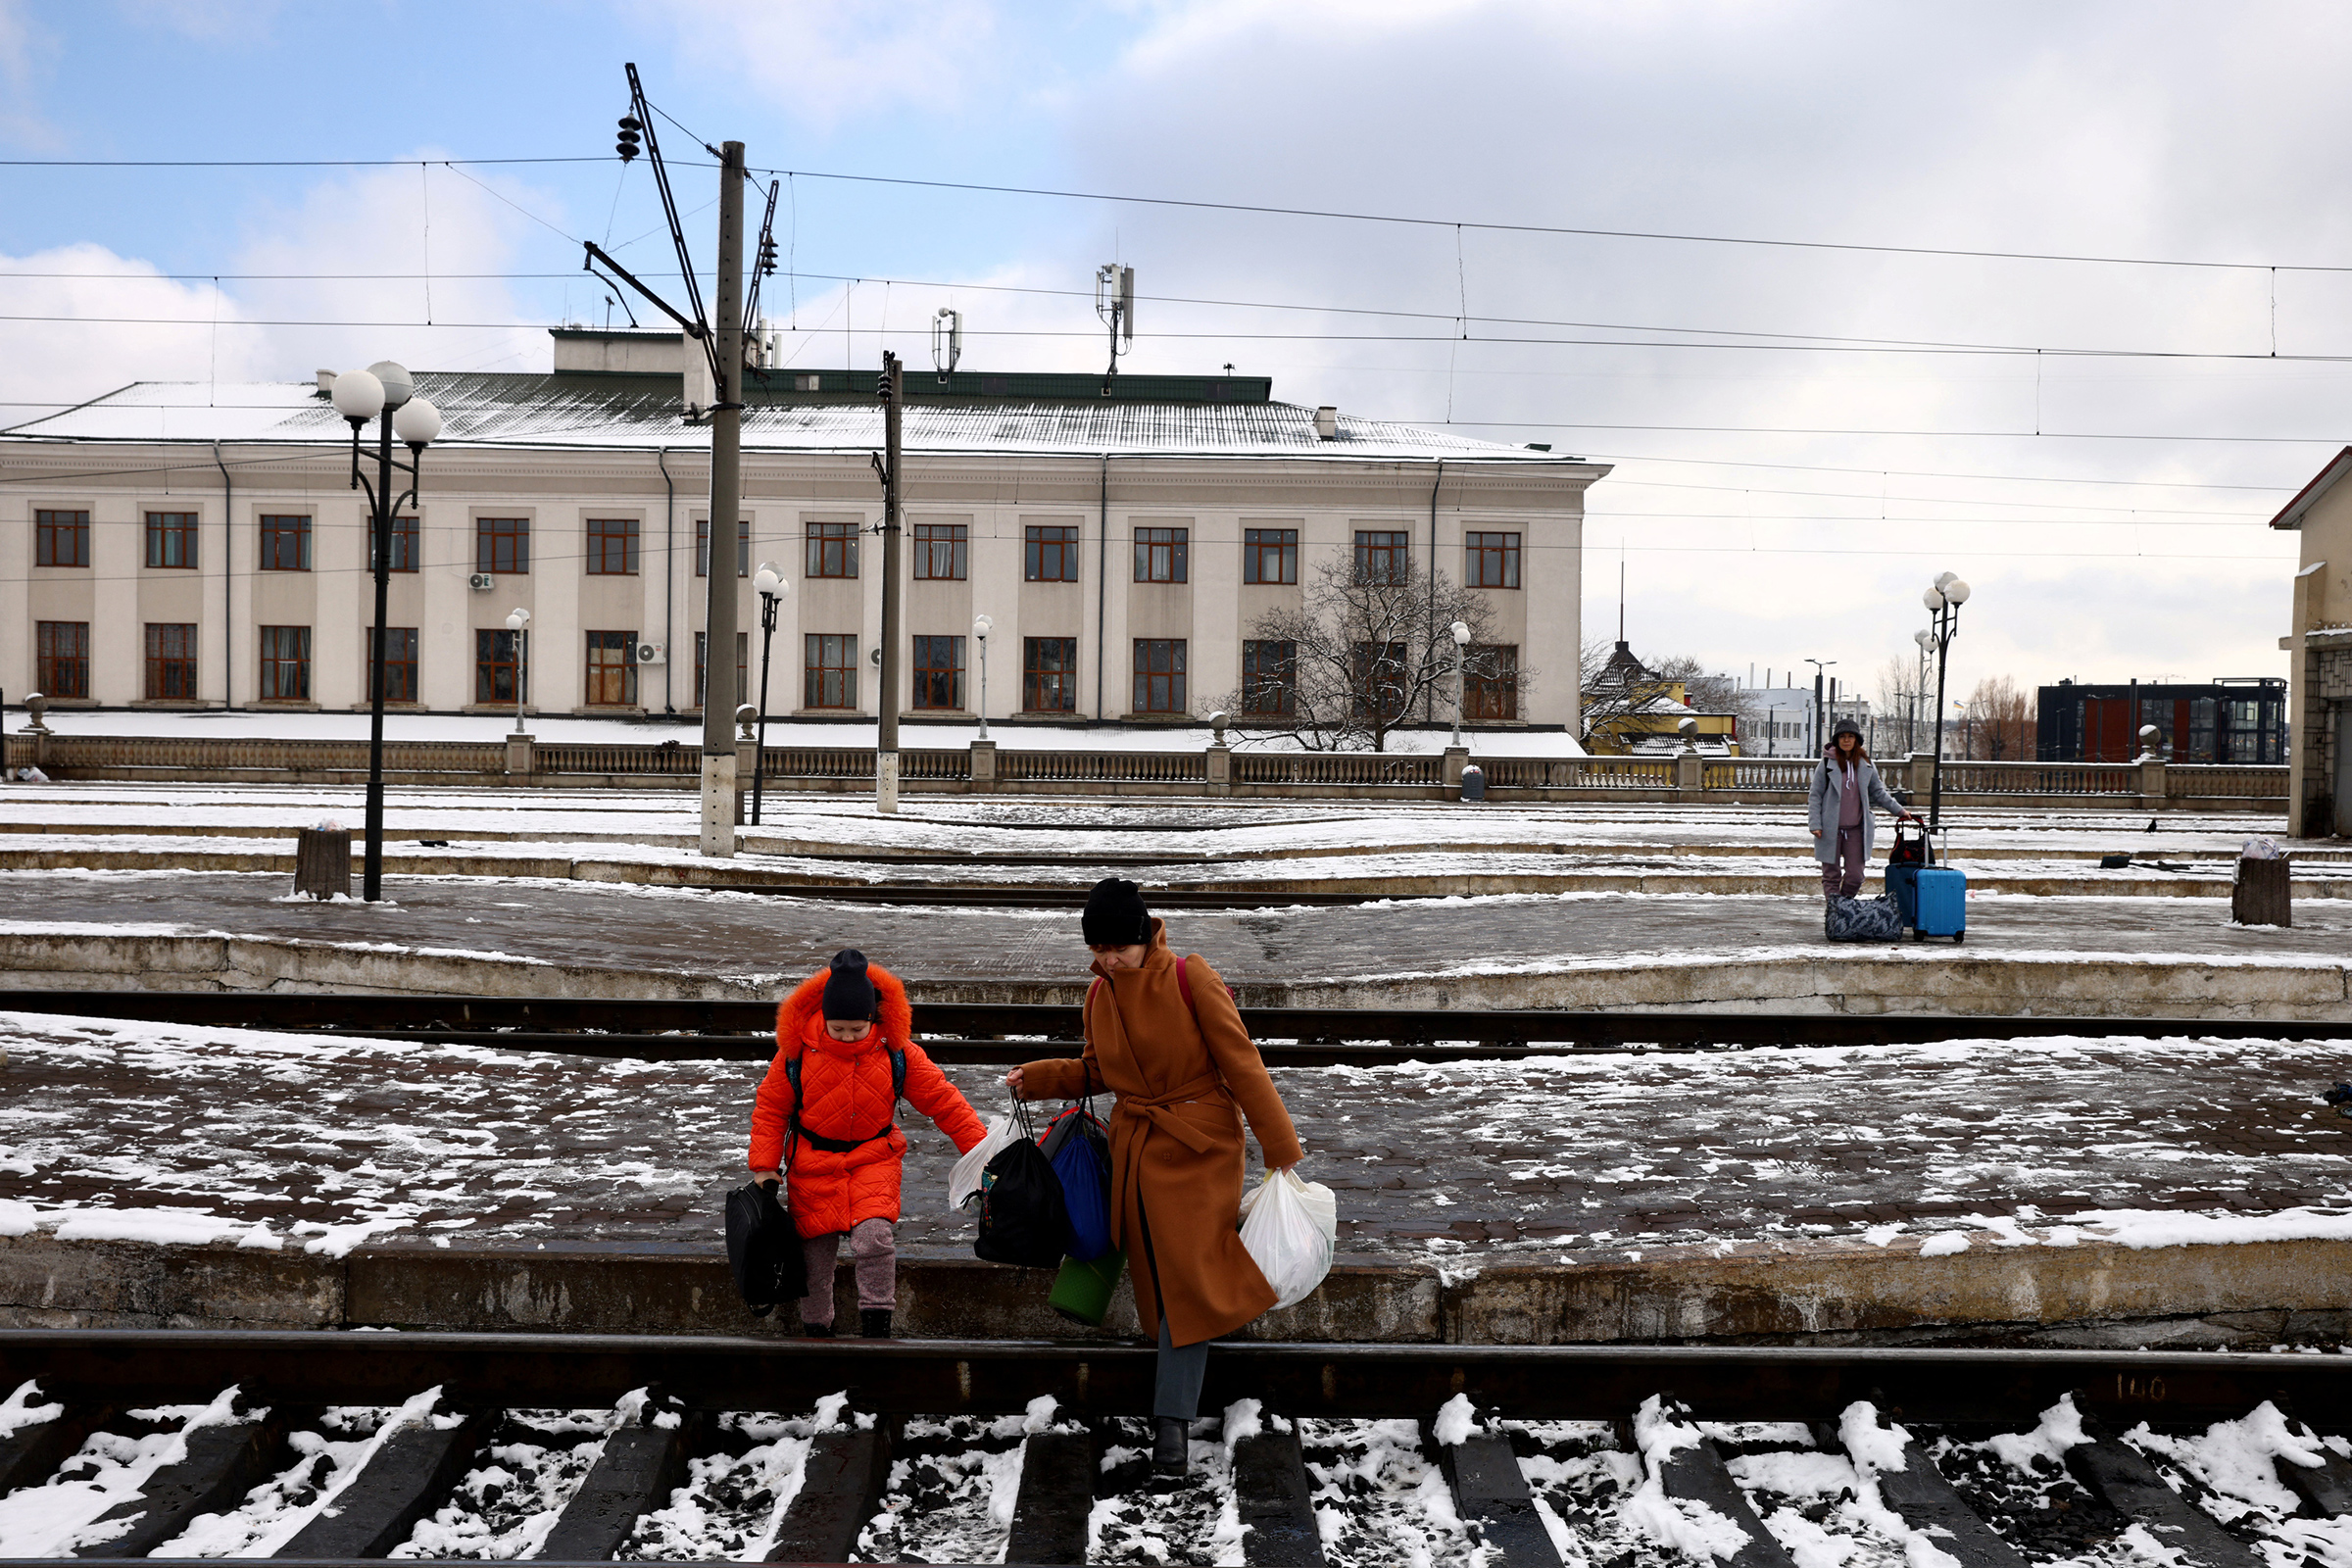 People fleeing Russia's invasion of Ukraine cross train tracks to get to a train leaving for Poland at the train station in Lviv, Ukraine, on Feb. 28 (Thomas Peter—Reuters)